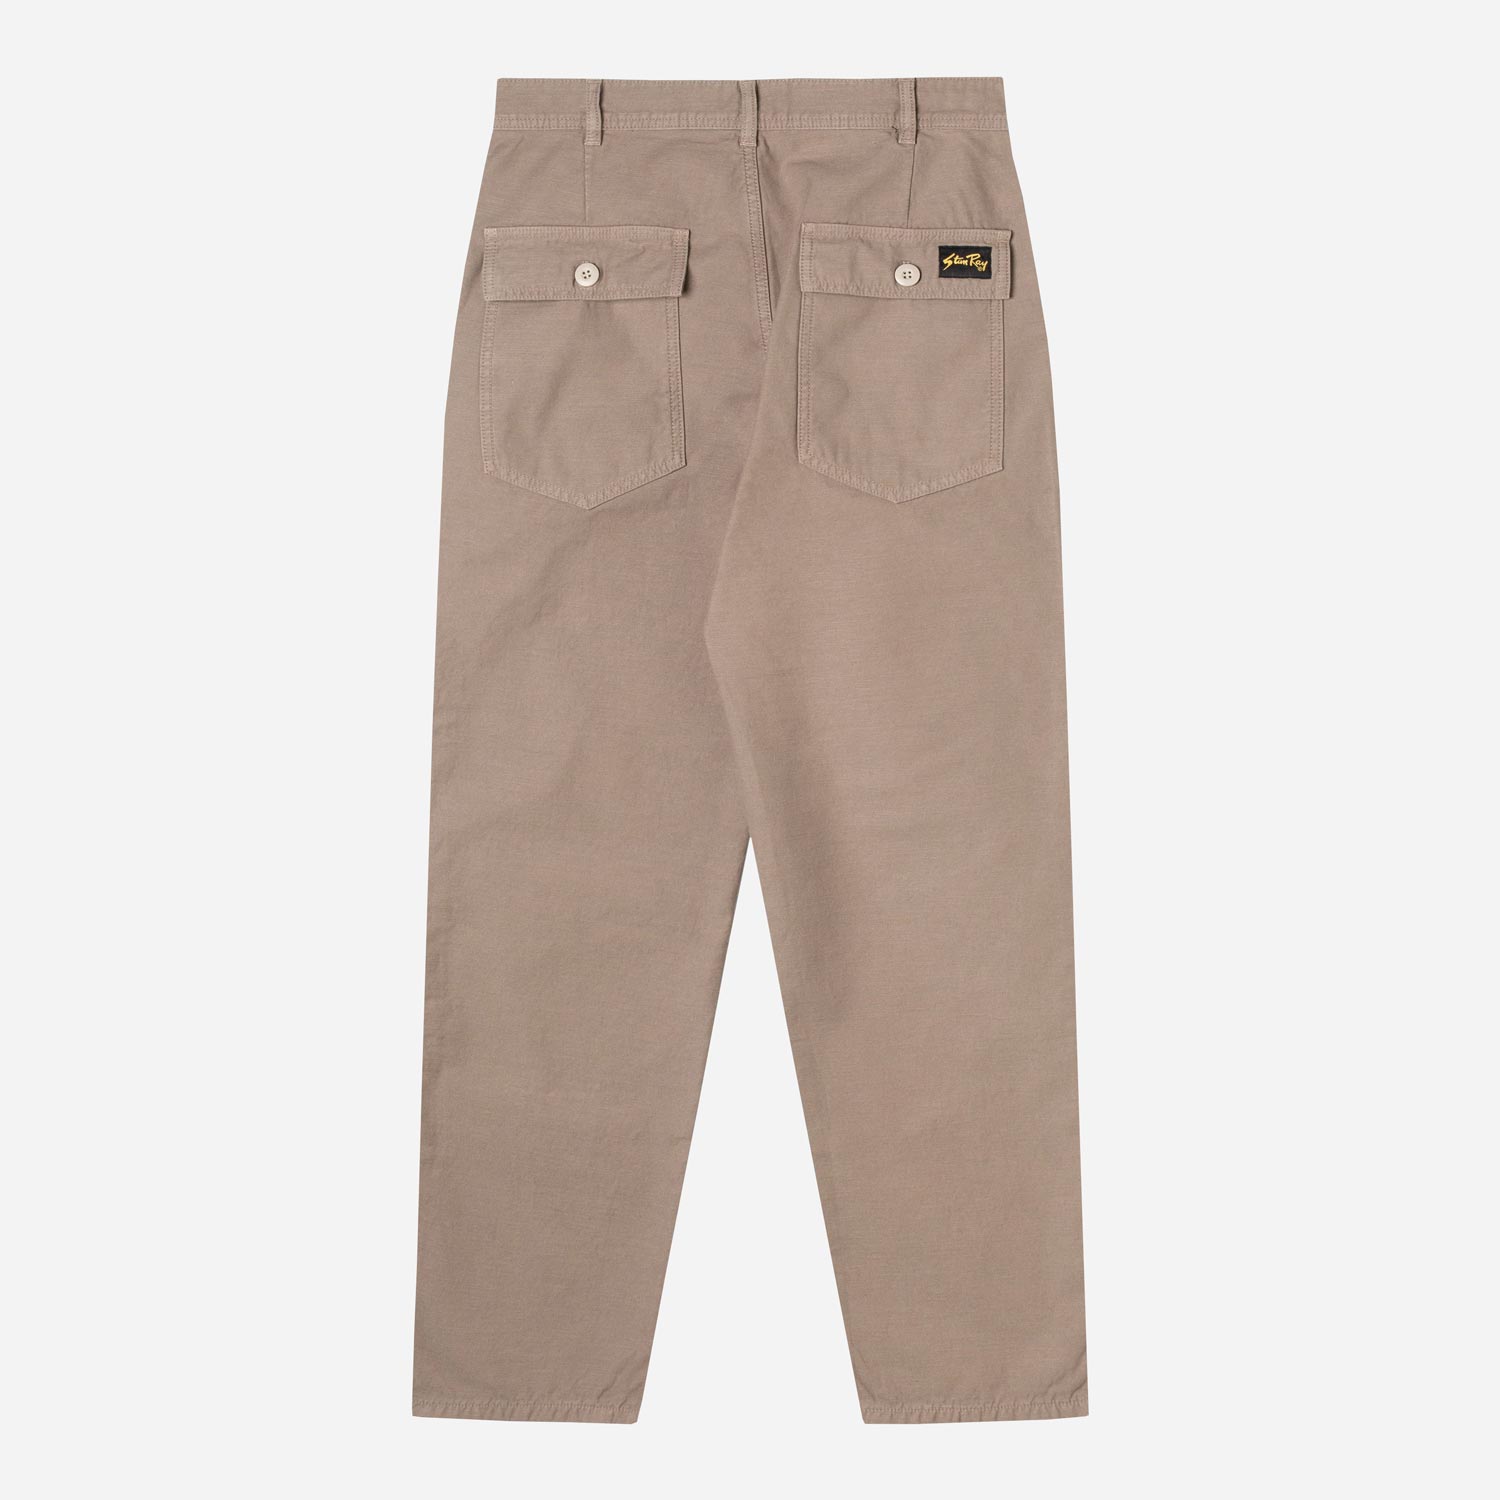 Stanray Loose Fit Fat Pant - Dusk